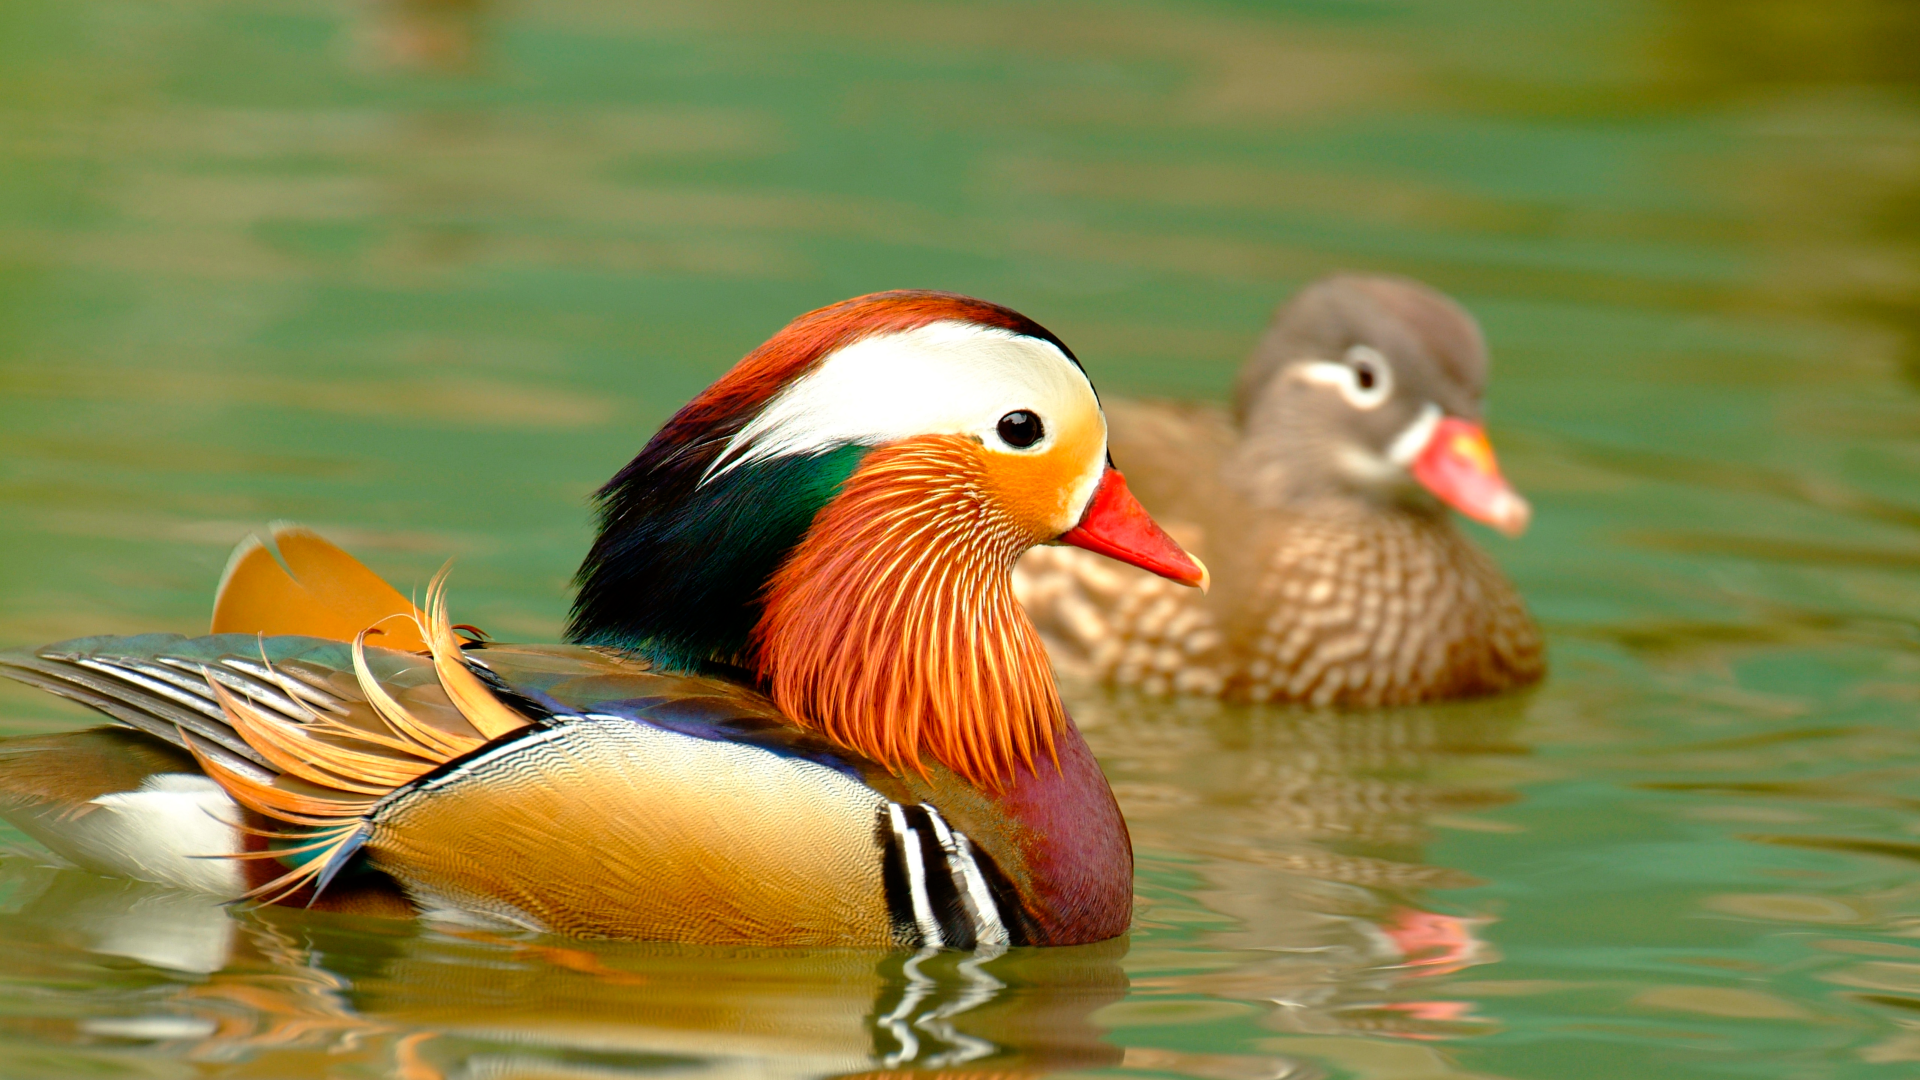 Mandarin ducks  arrive at wintering grounds in east China 